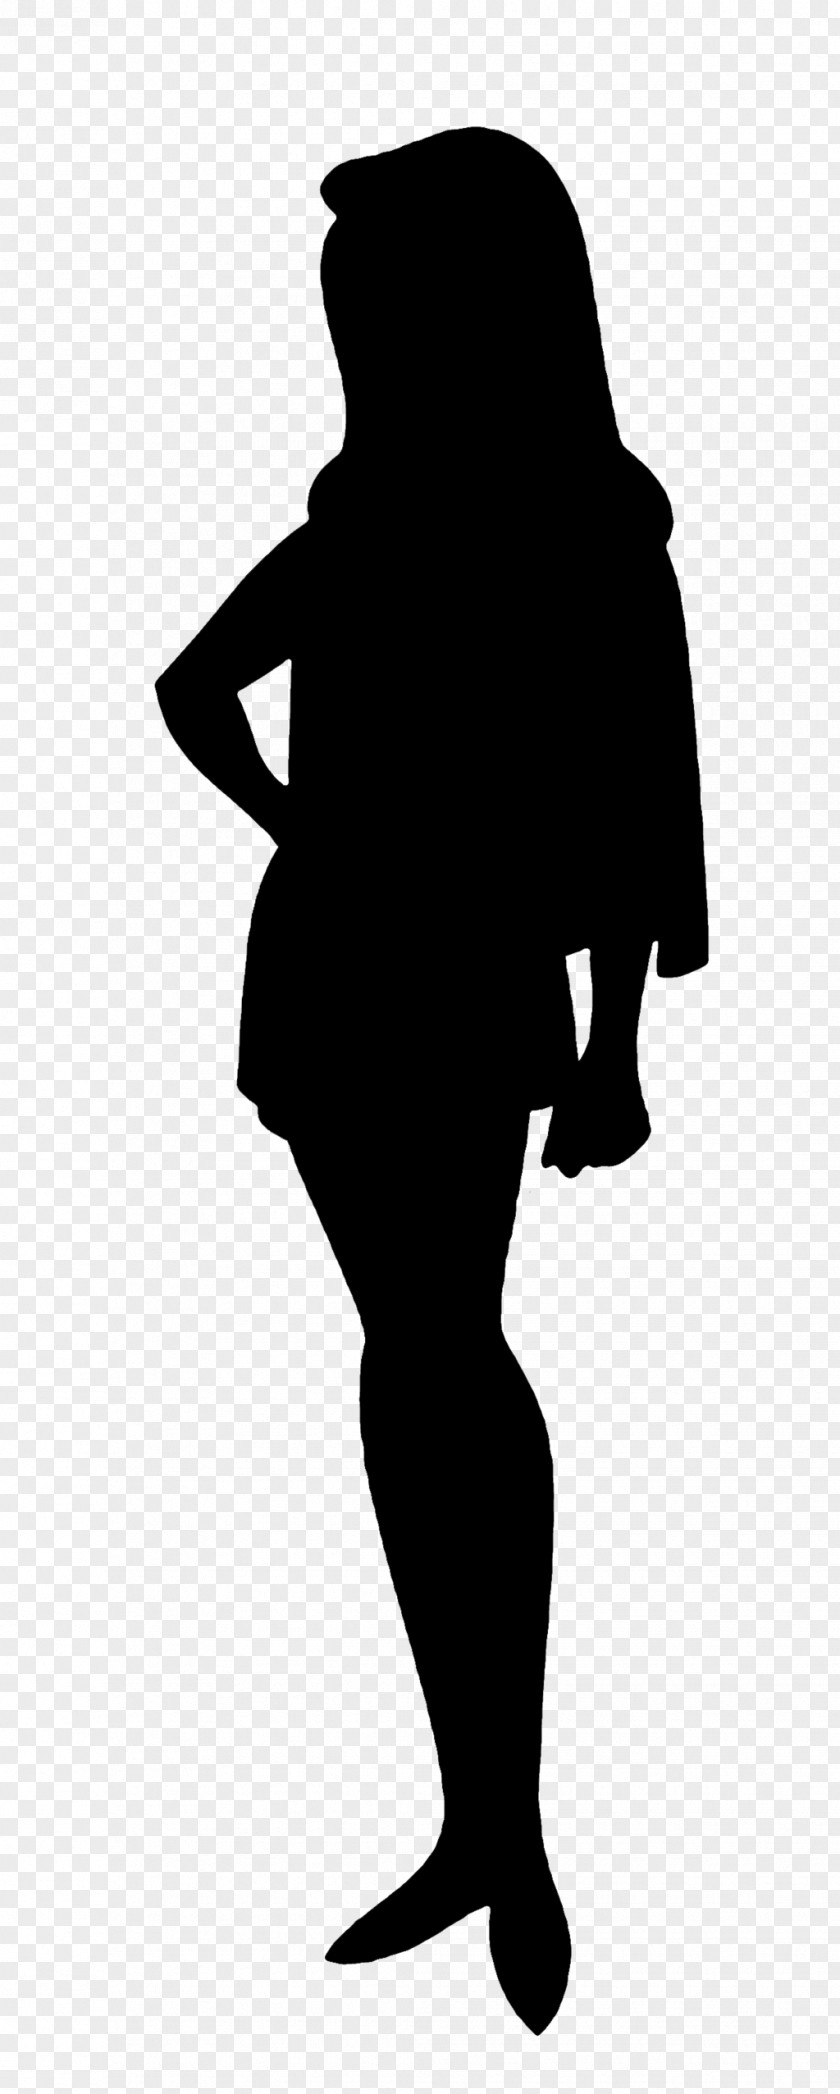 Vector Graphics Clip Art Silhouette Illustration Image PNG